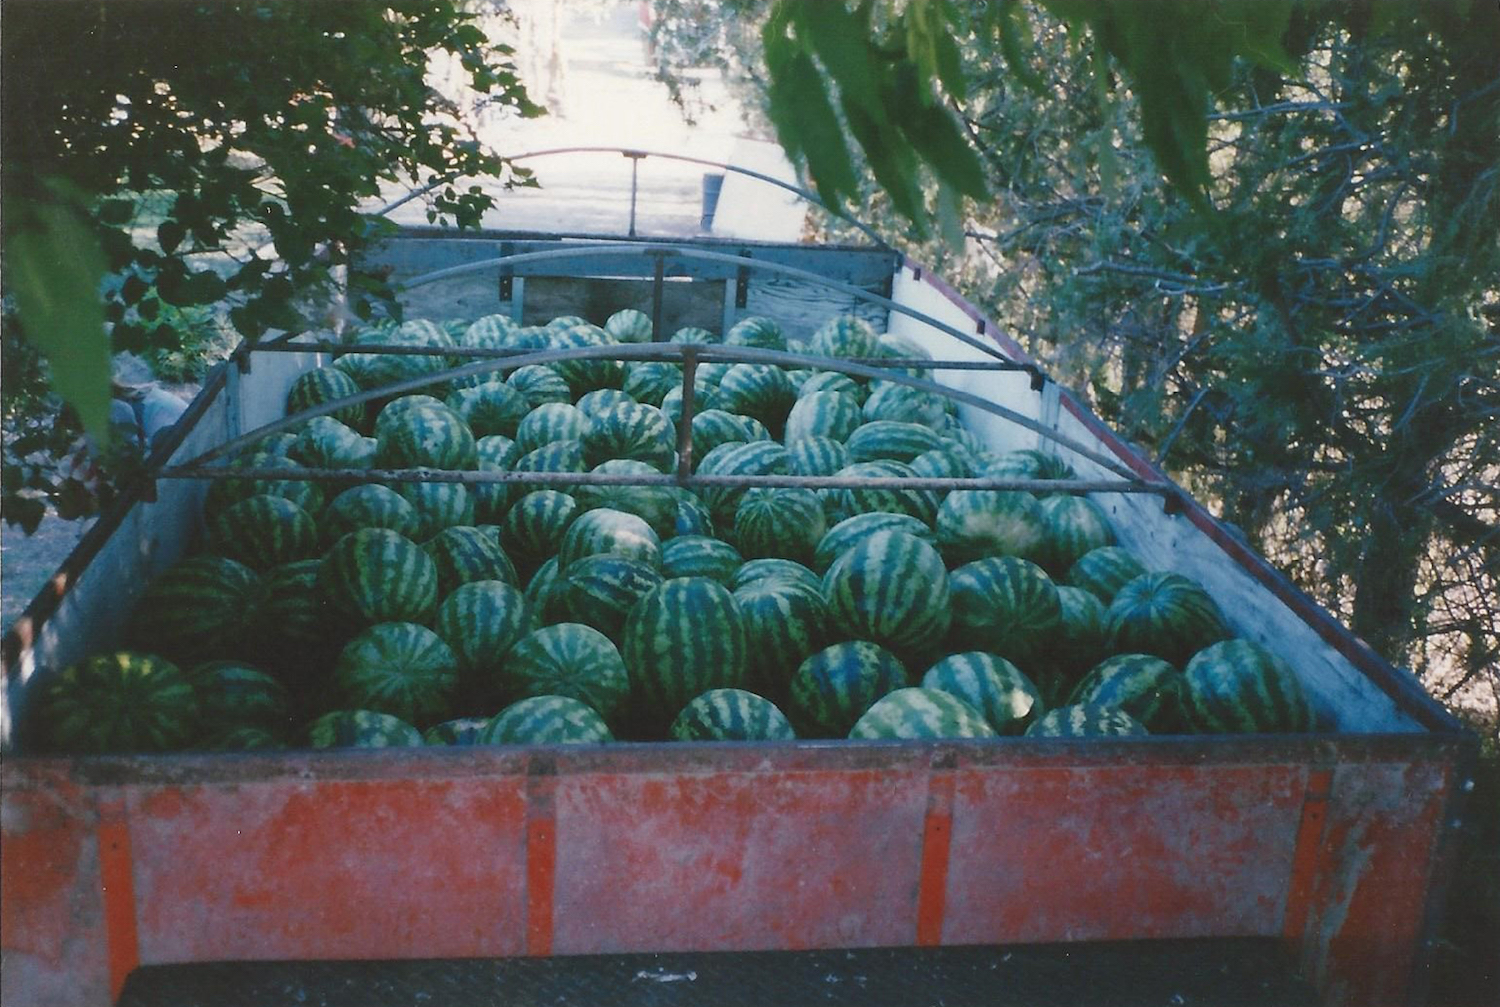 The history of growing watermelons, cantaloups, and honeydew melon in Idaho.